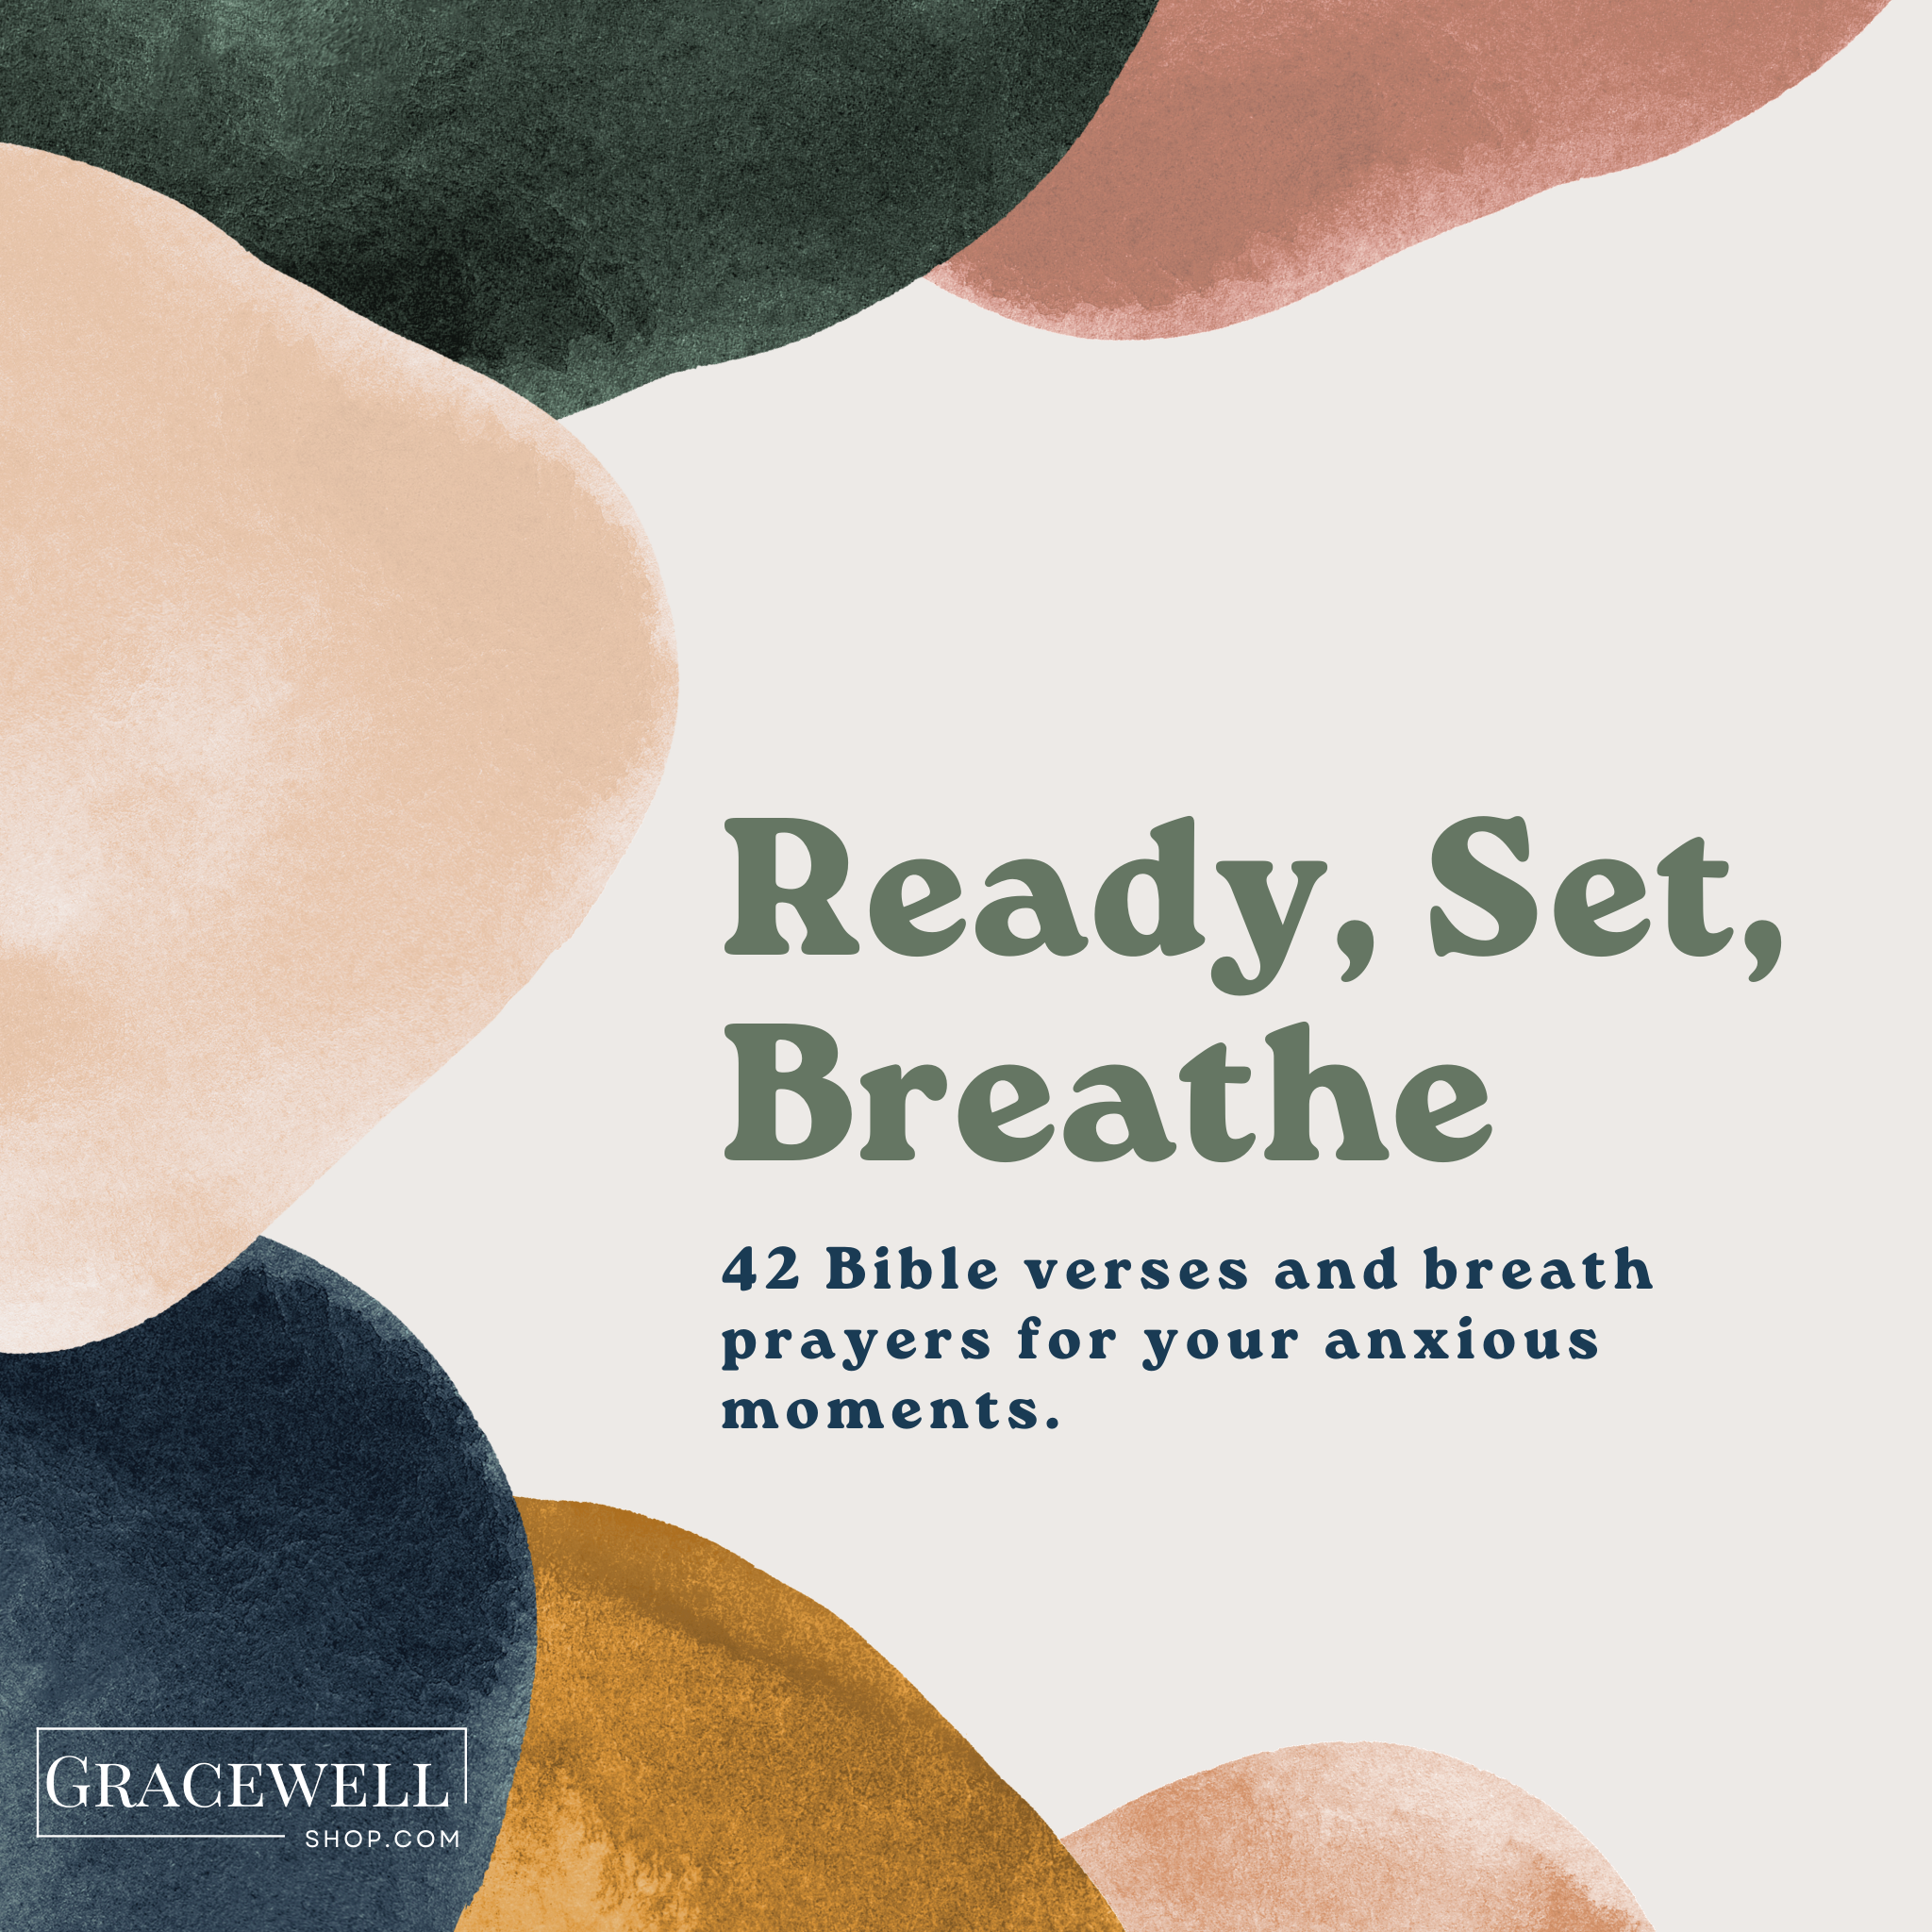 Ready, Set, Breathe: 42 Bible Verses And Breath Prayers For Your Anxious Moments Card Deck